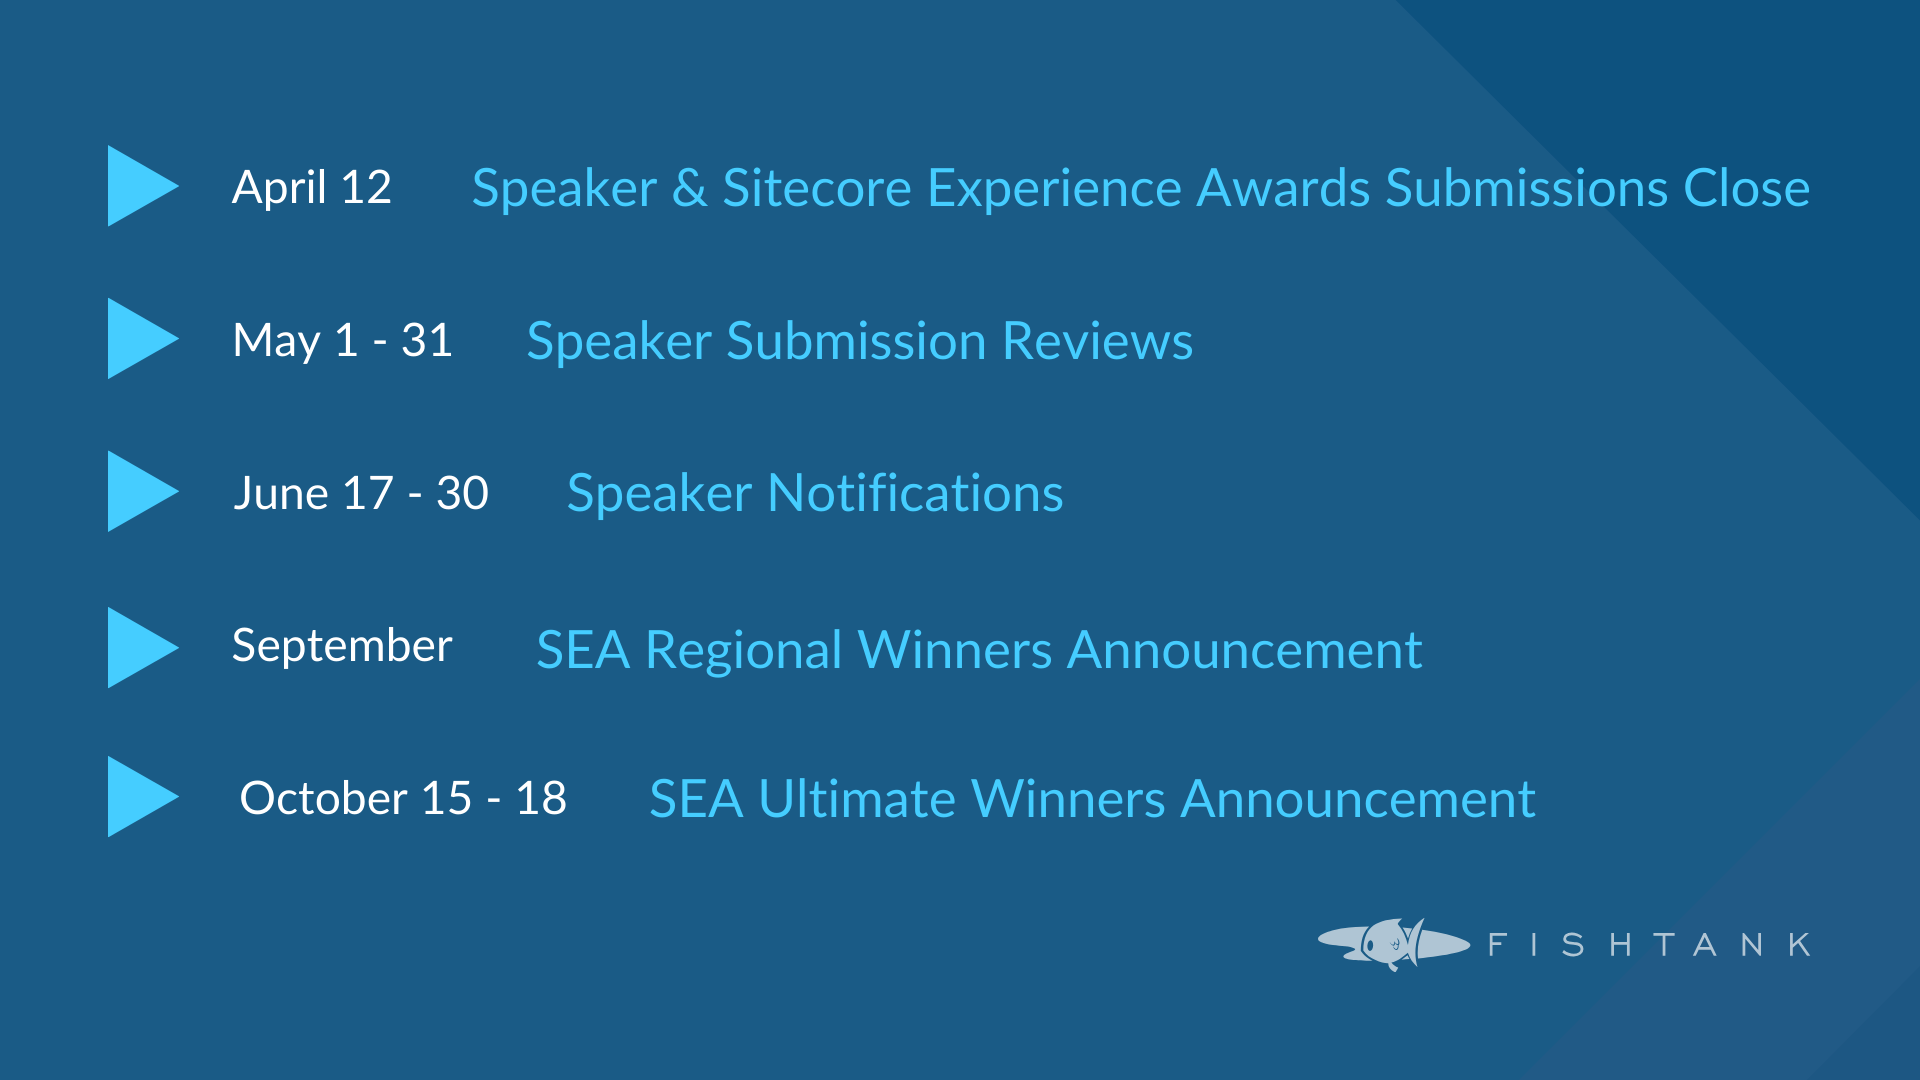 A blue timeline graphic detailing dates for speaker and Sitecore Experience Awards announcements.